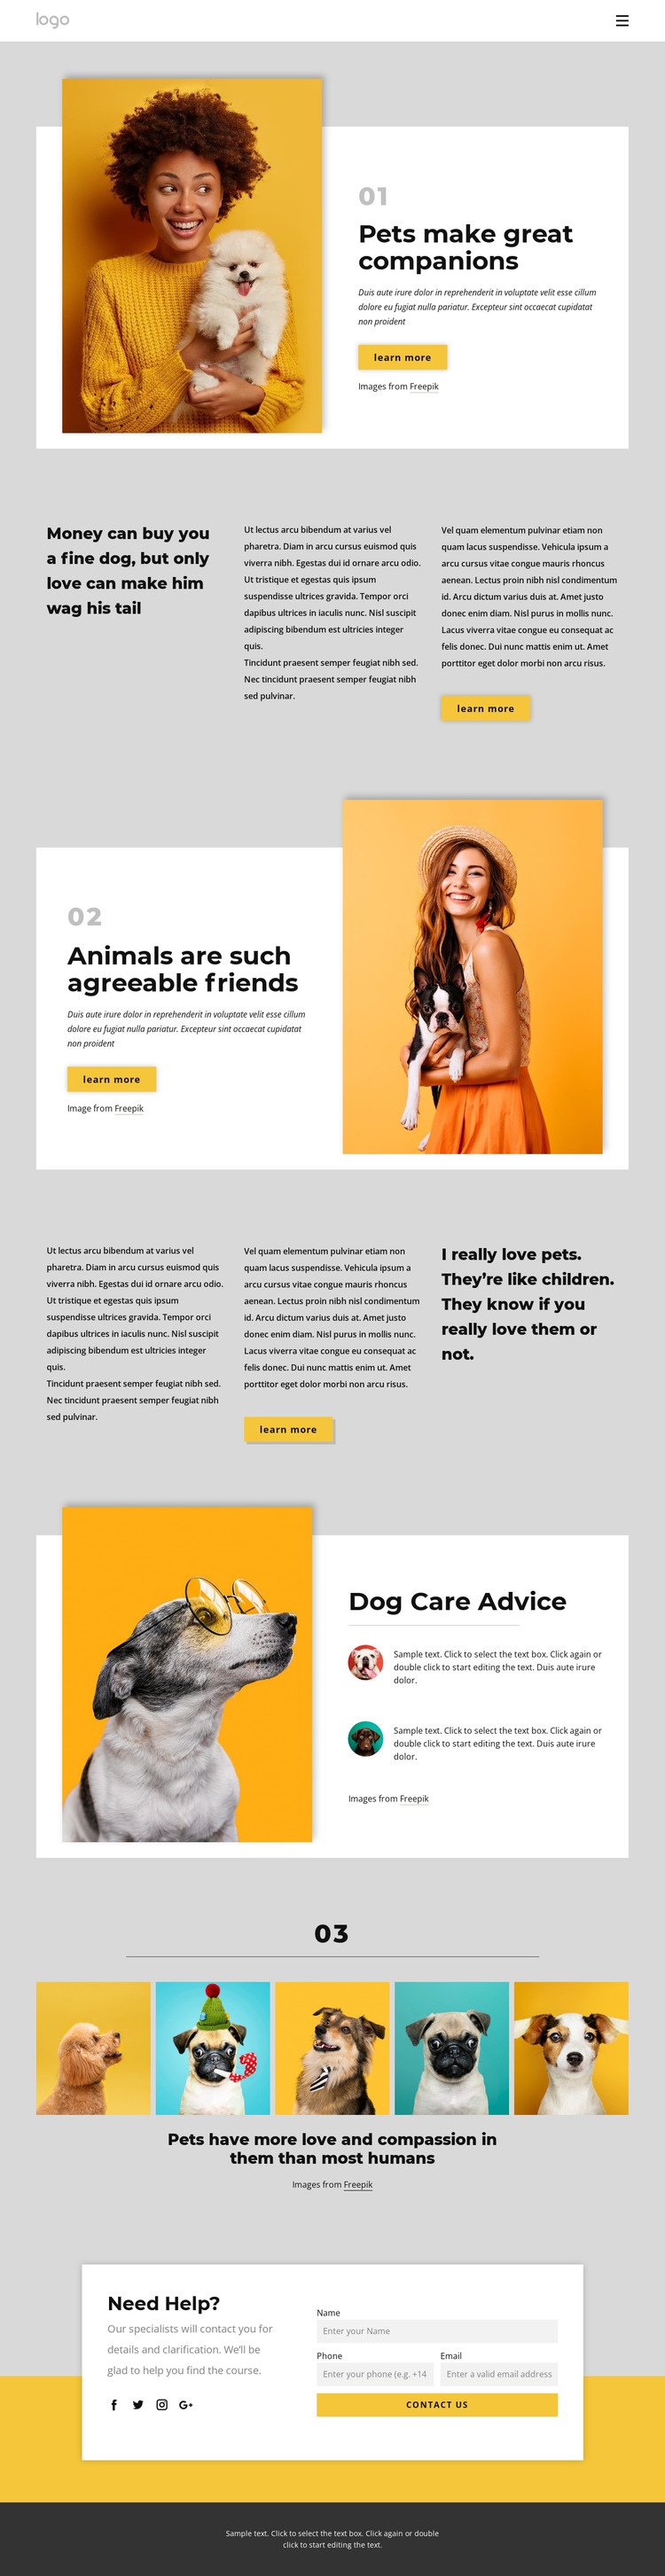 Why pets make us happier Html Code Example